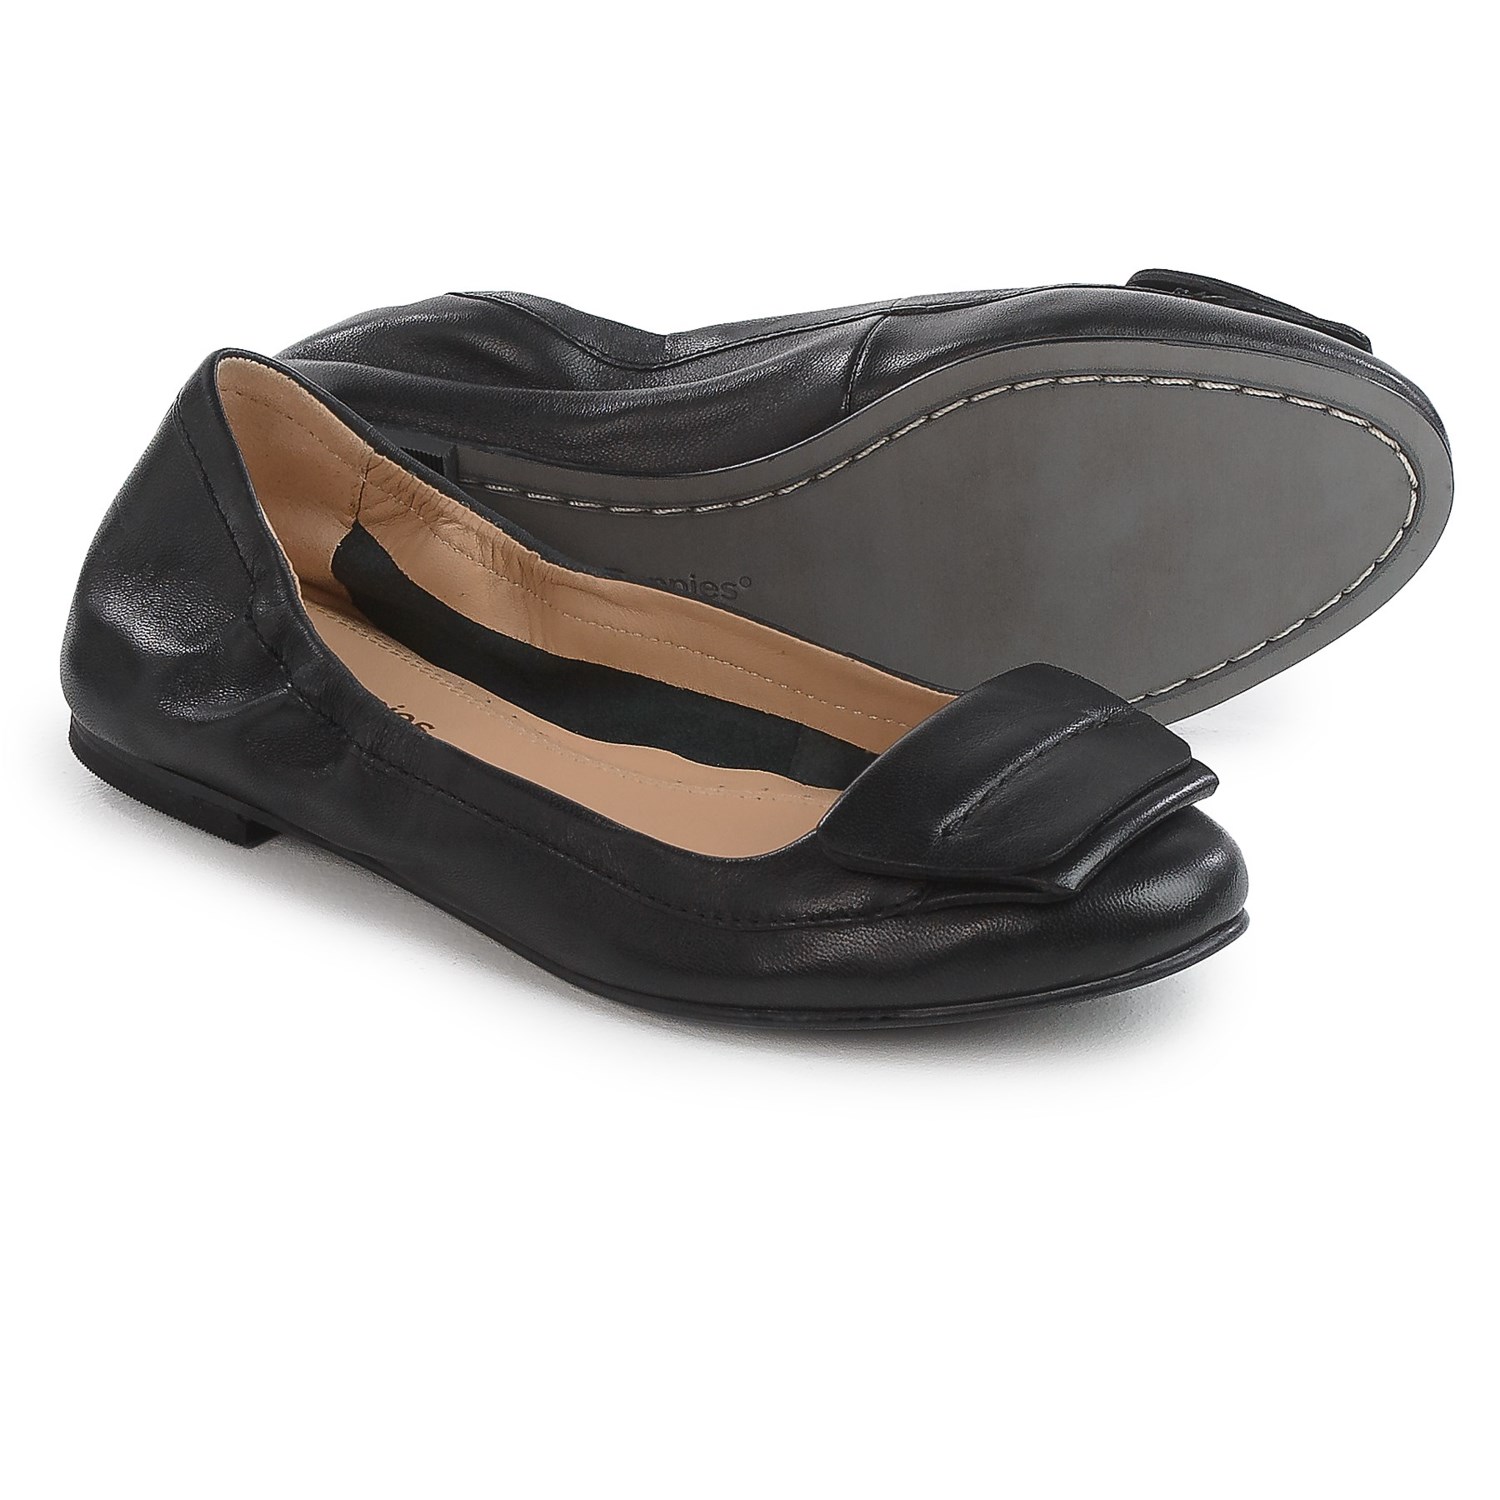 Hush Puppies Livi Heather Ballet Flats – Leather (For Women)